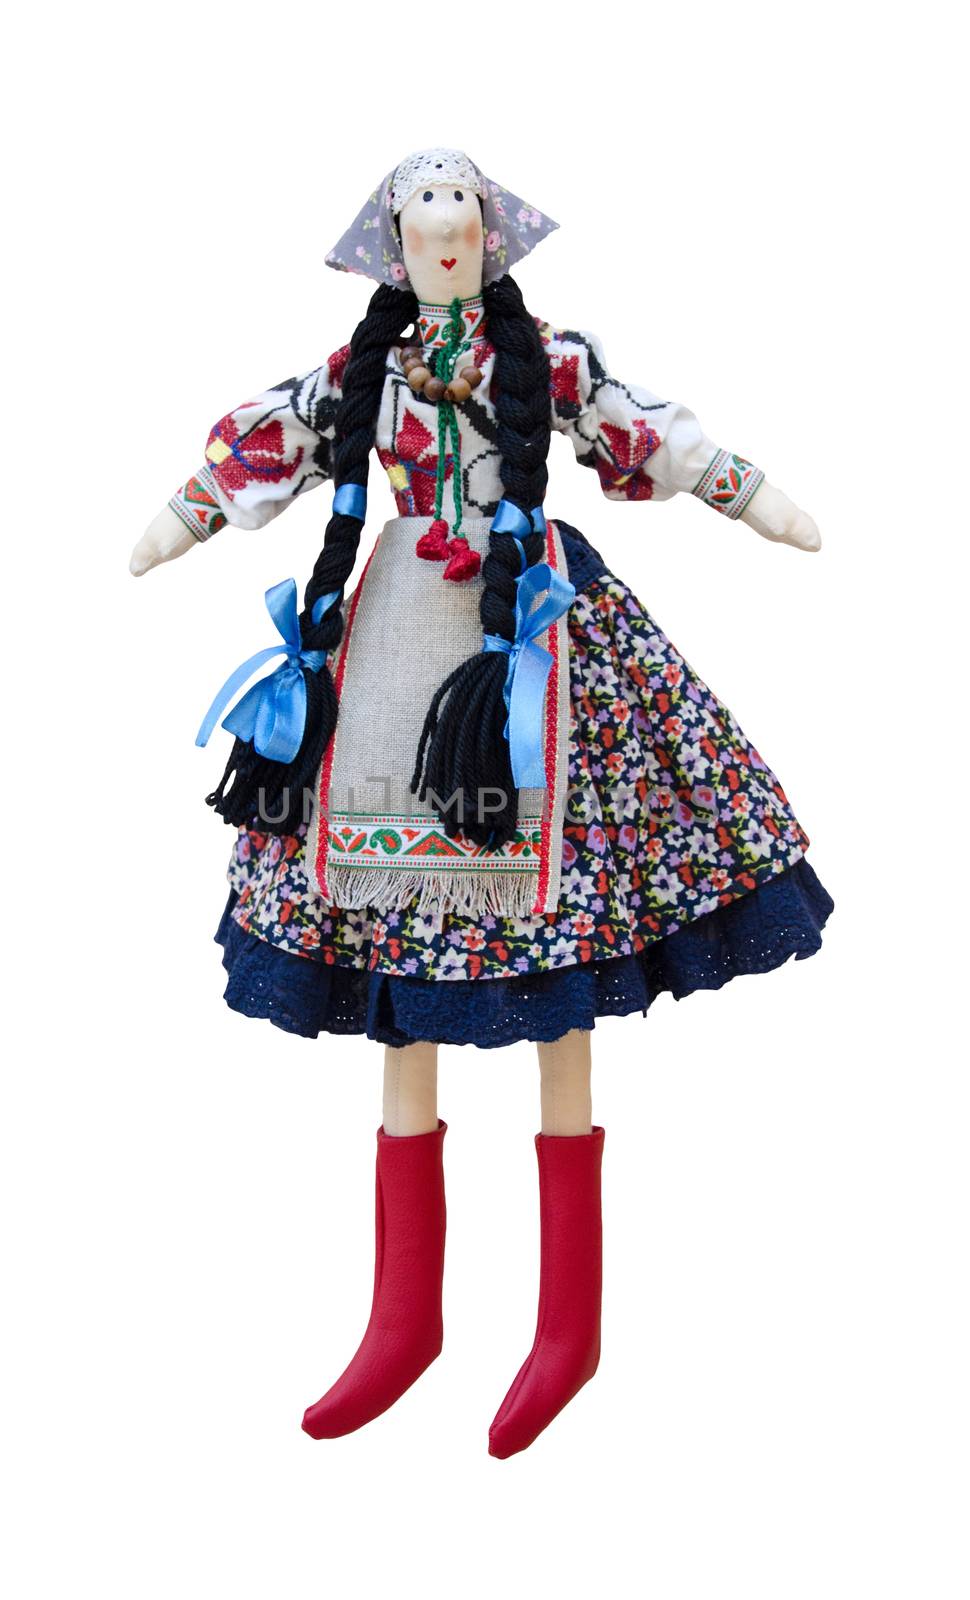 The Isolated handmade doll in the national Ukrainian costume with two pigtails